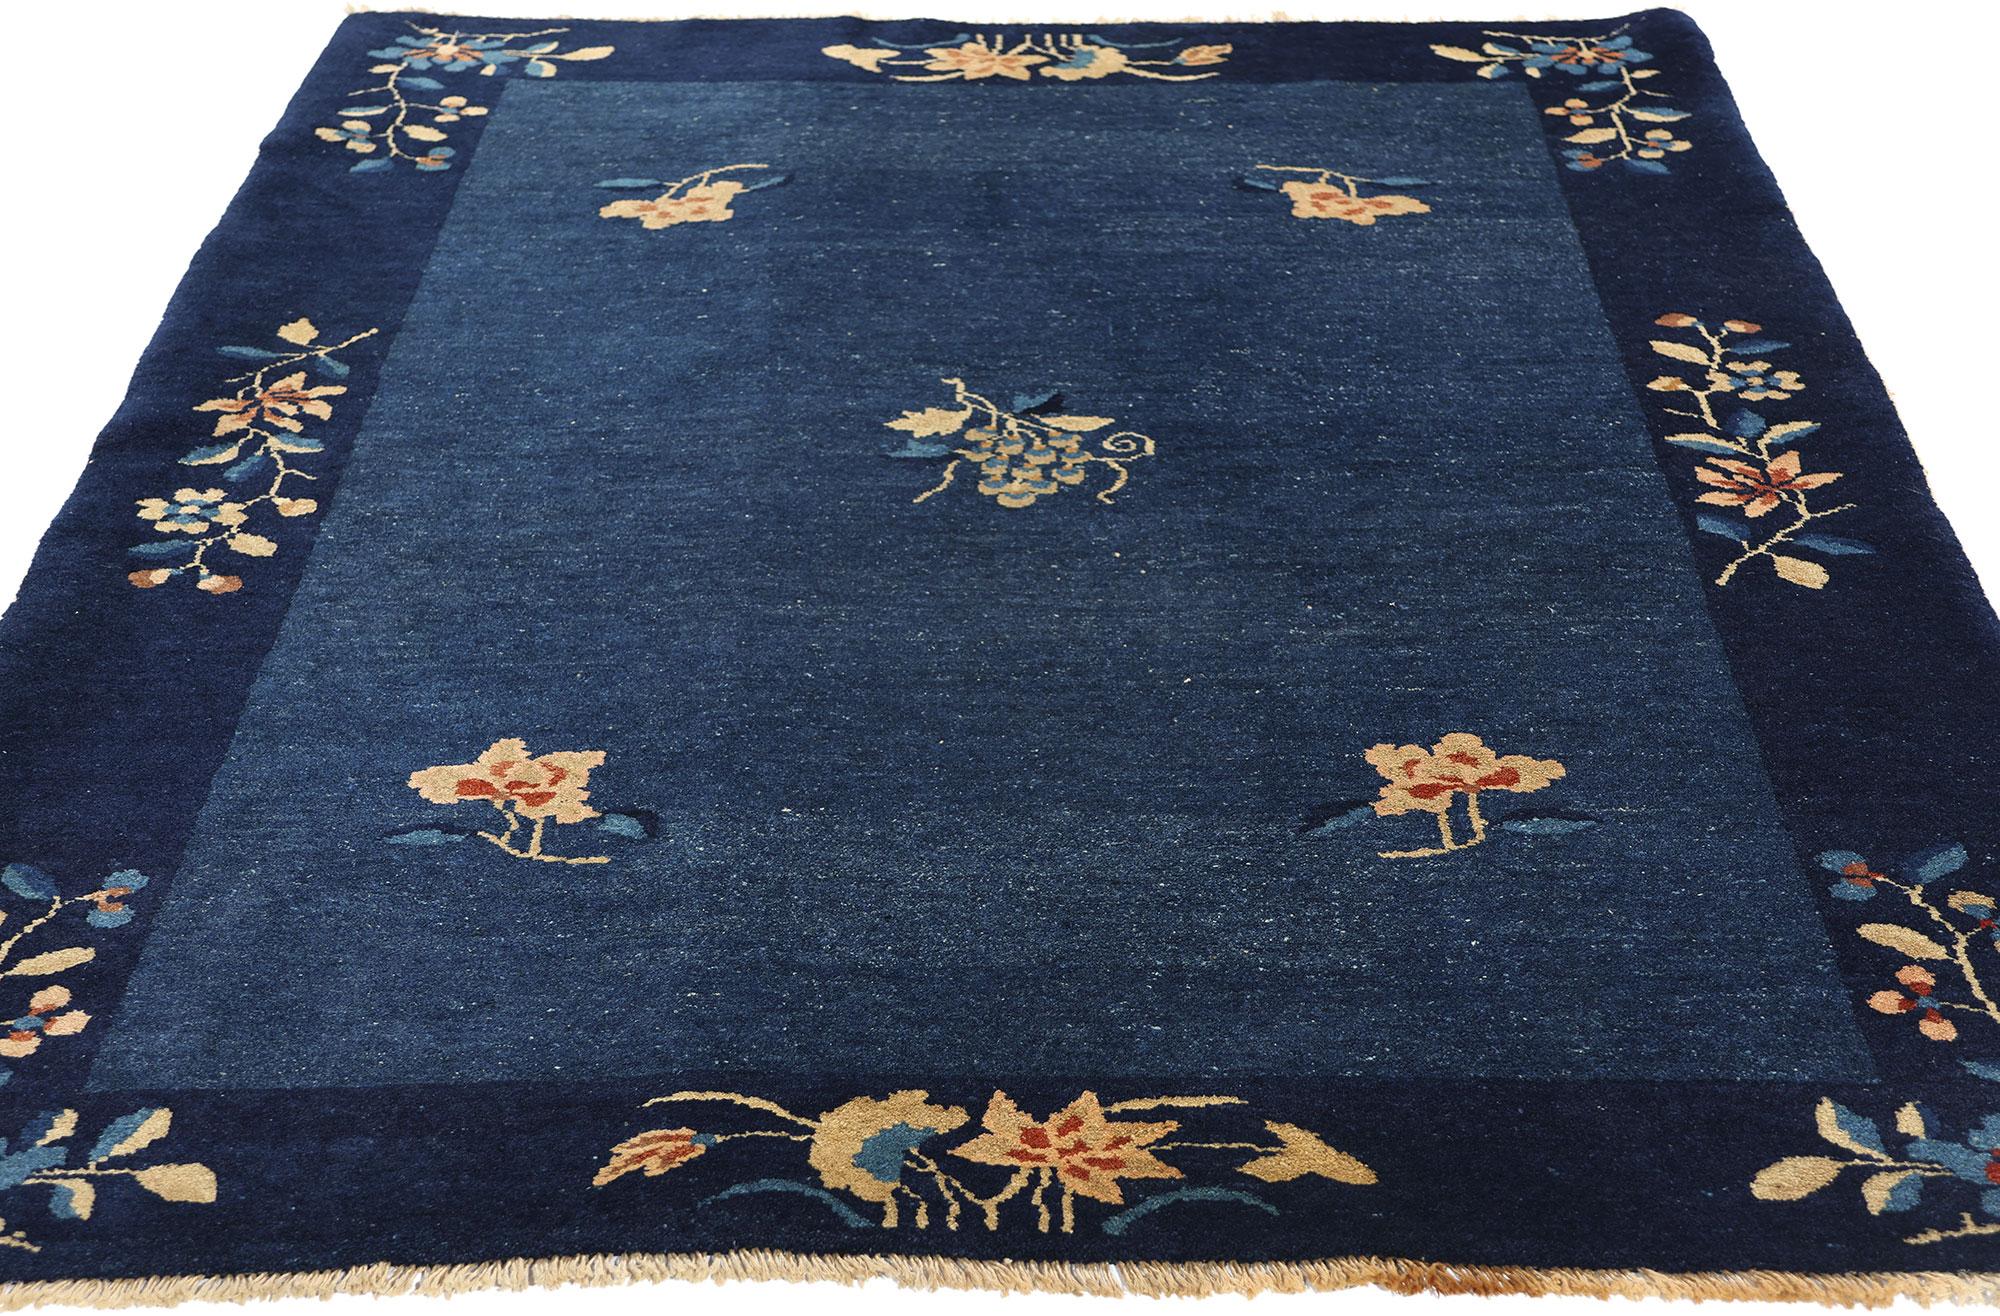 Qing Antique Blue Chinese Peking Rug, Chinoiserie Chic Meets Regal Decadence For Sale